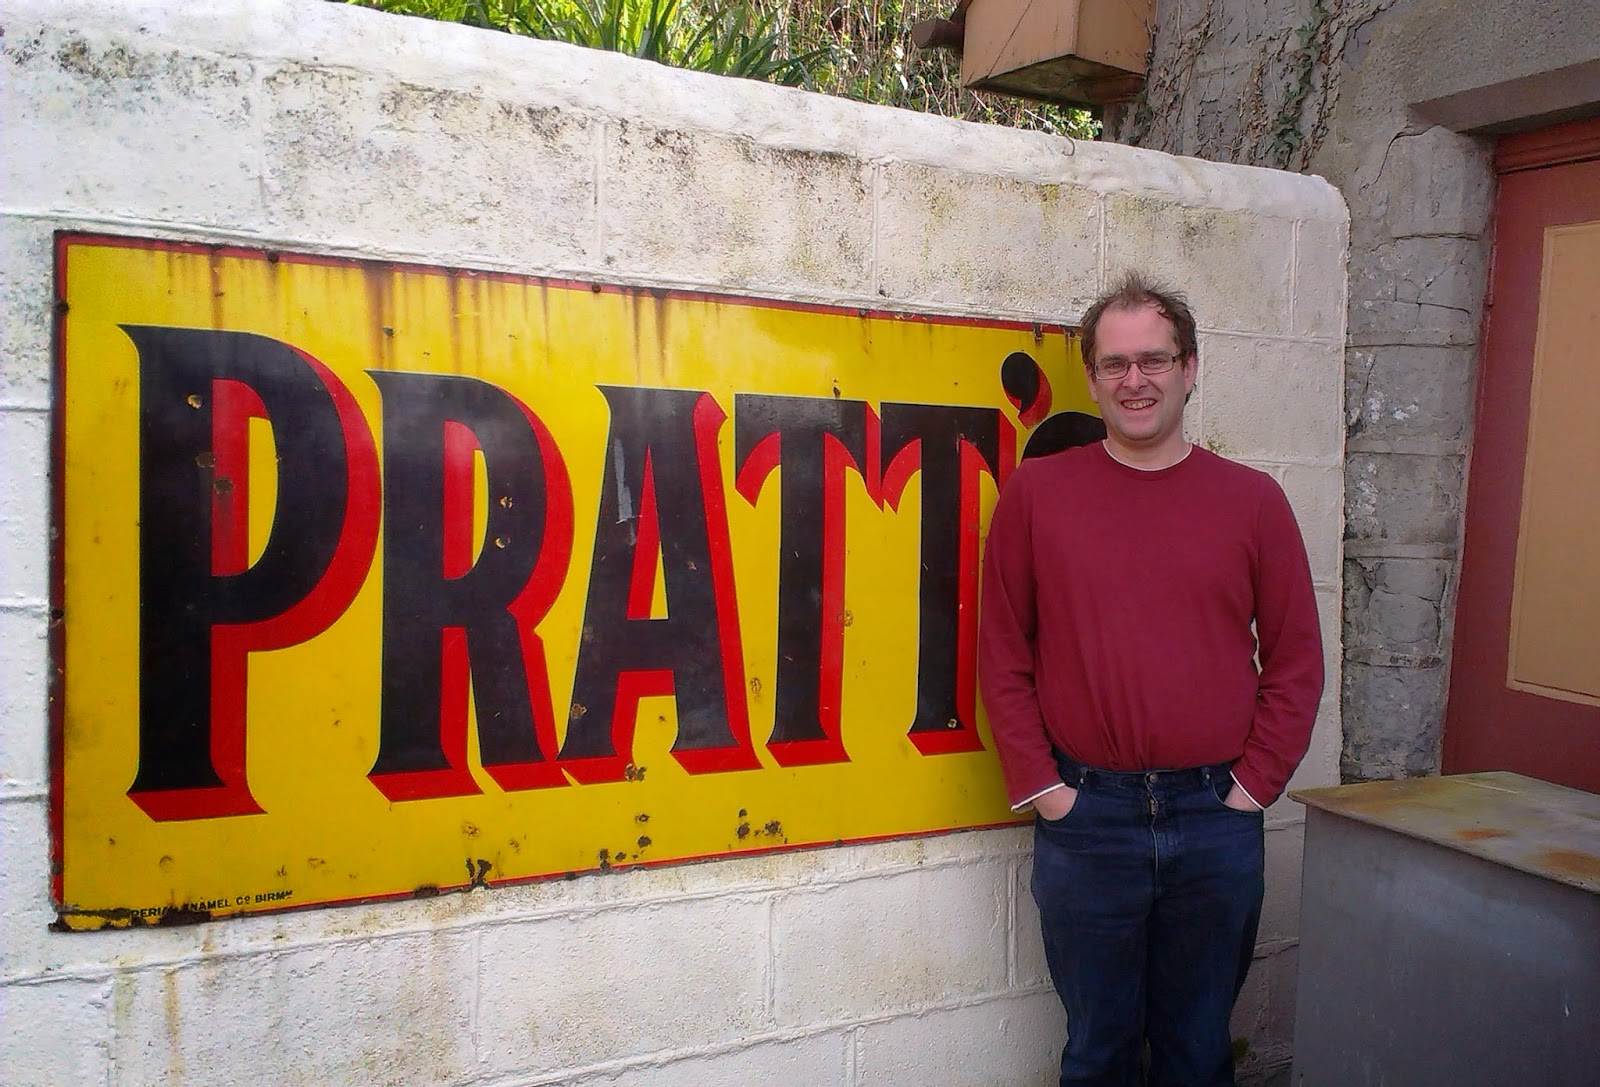 Andrew in front of a vintage Pratt's sign